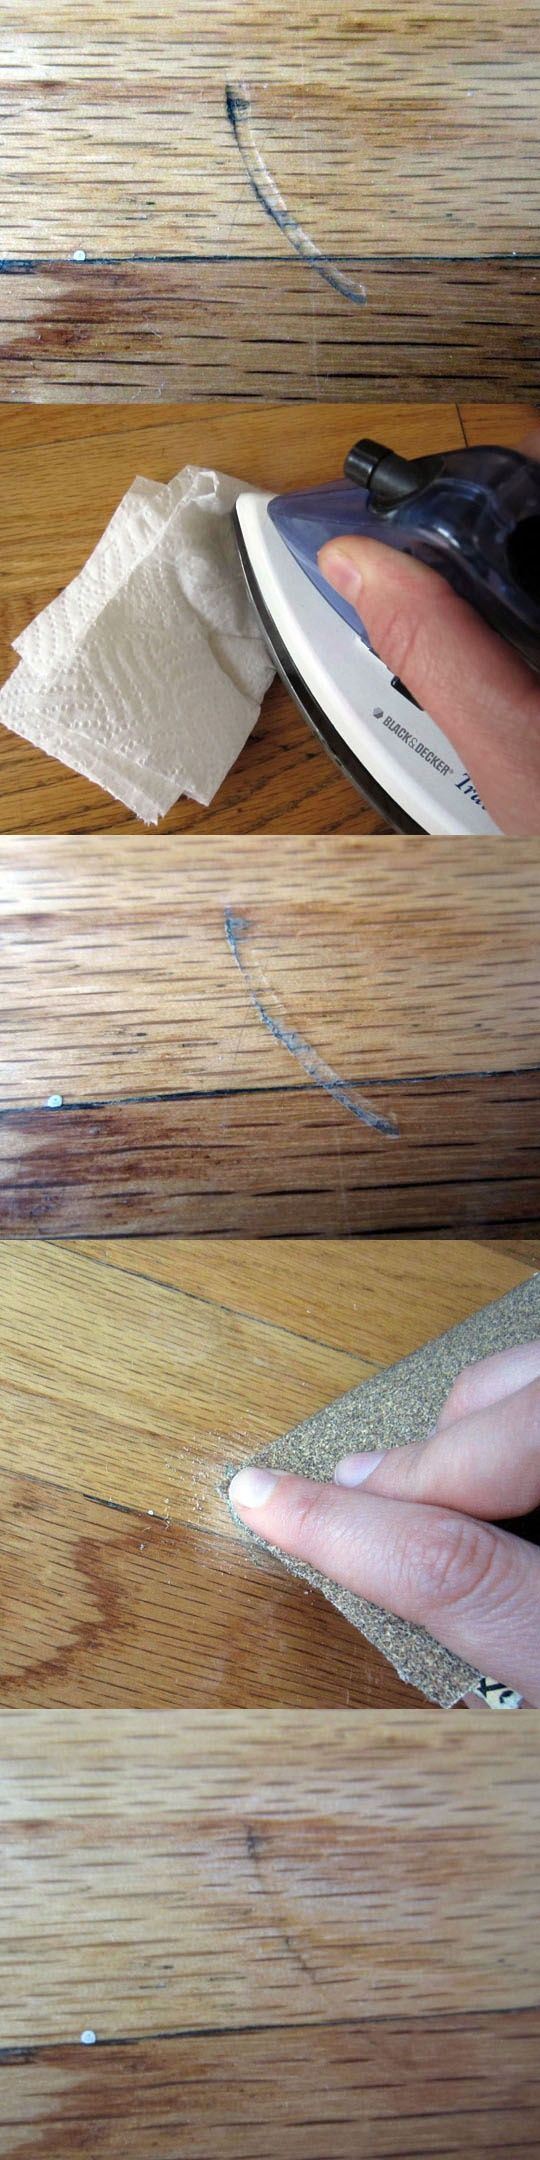 hardwood floor dent repair of 25 best renovation images on pinterest diving scuba diving and pertaining to diy how to fix dents in wooden floors furniture with an iron